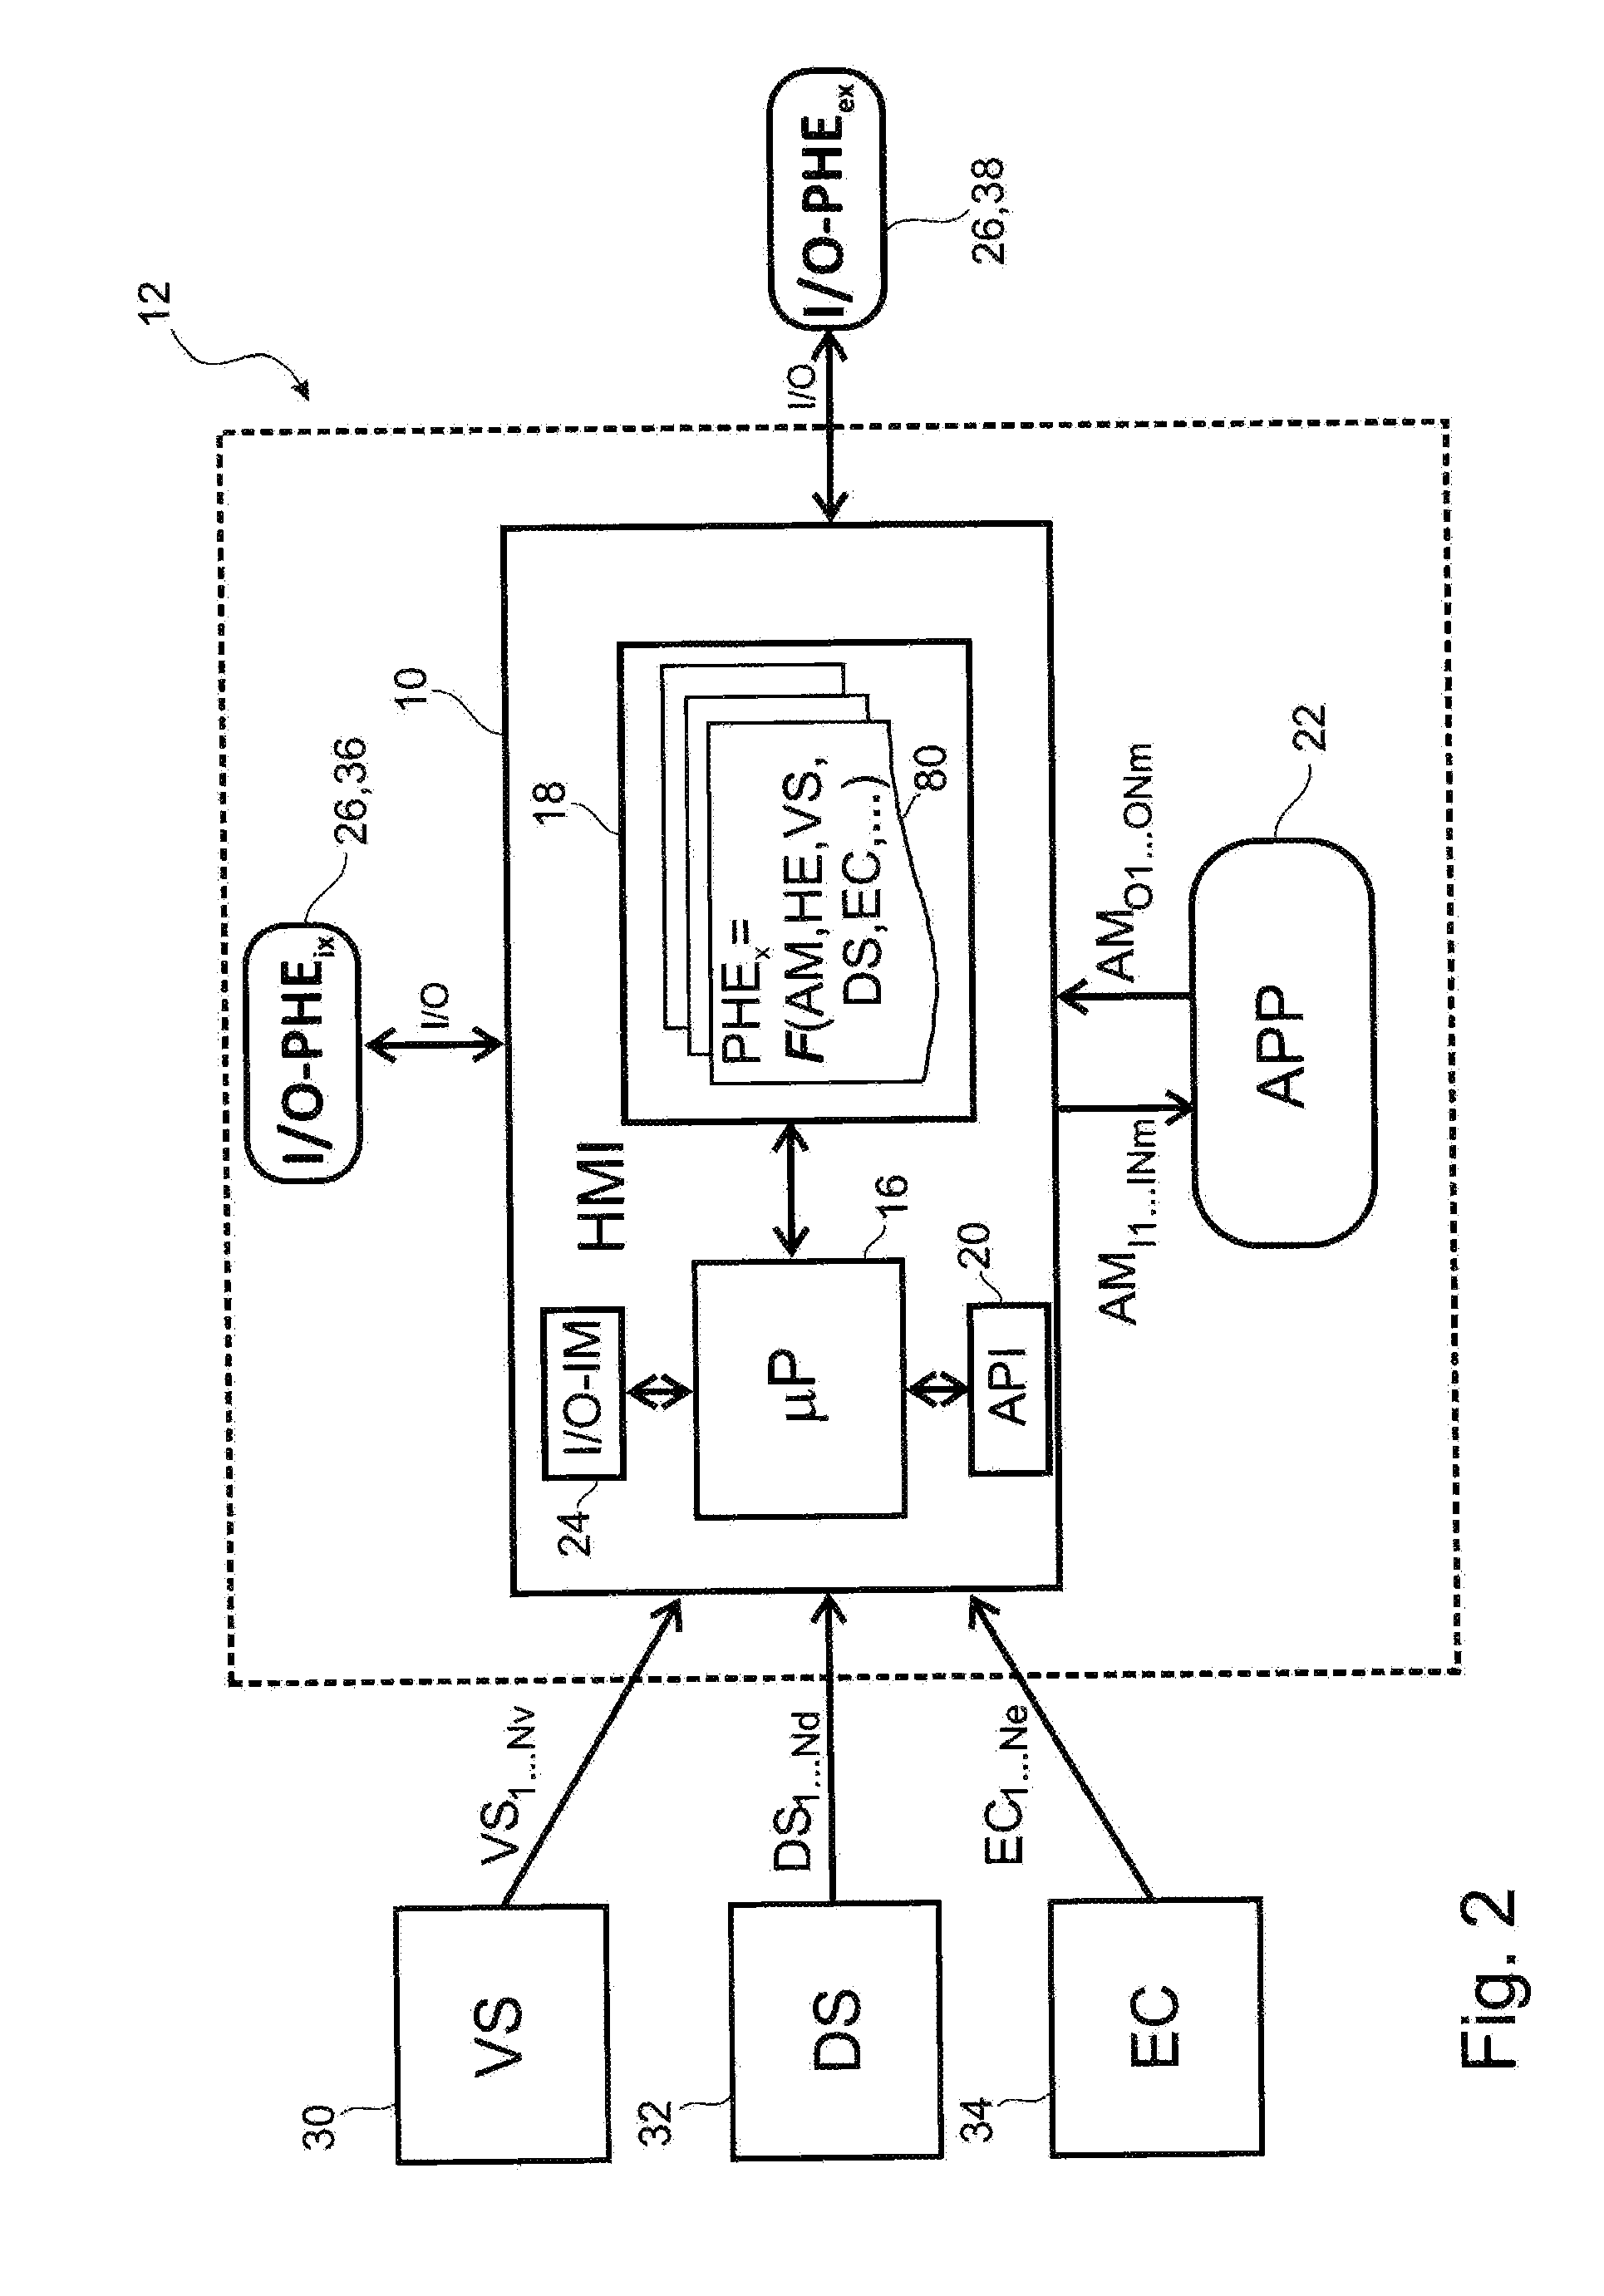 Human machine interface unit for a communication device in a vehicle and I/O method using said human machine interface unit